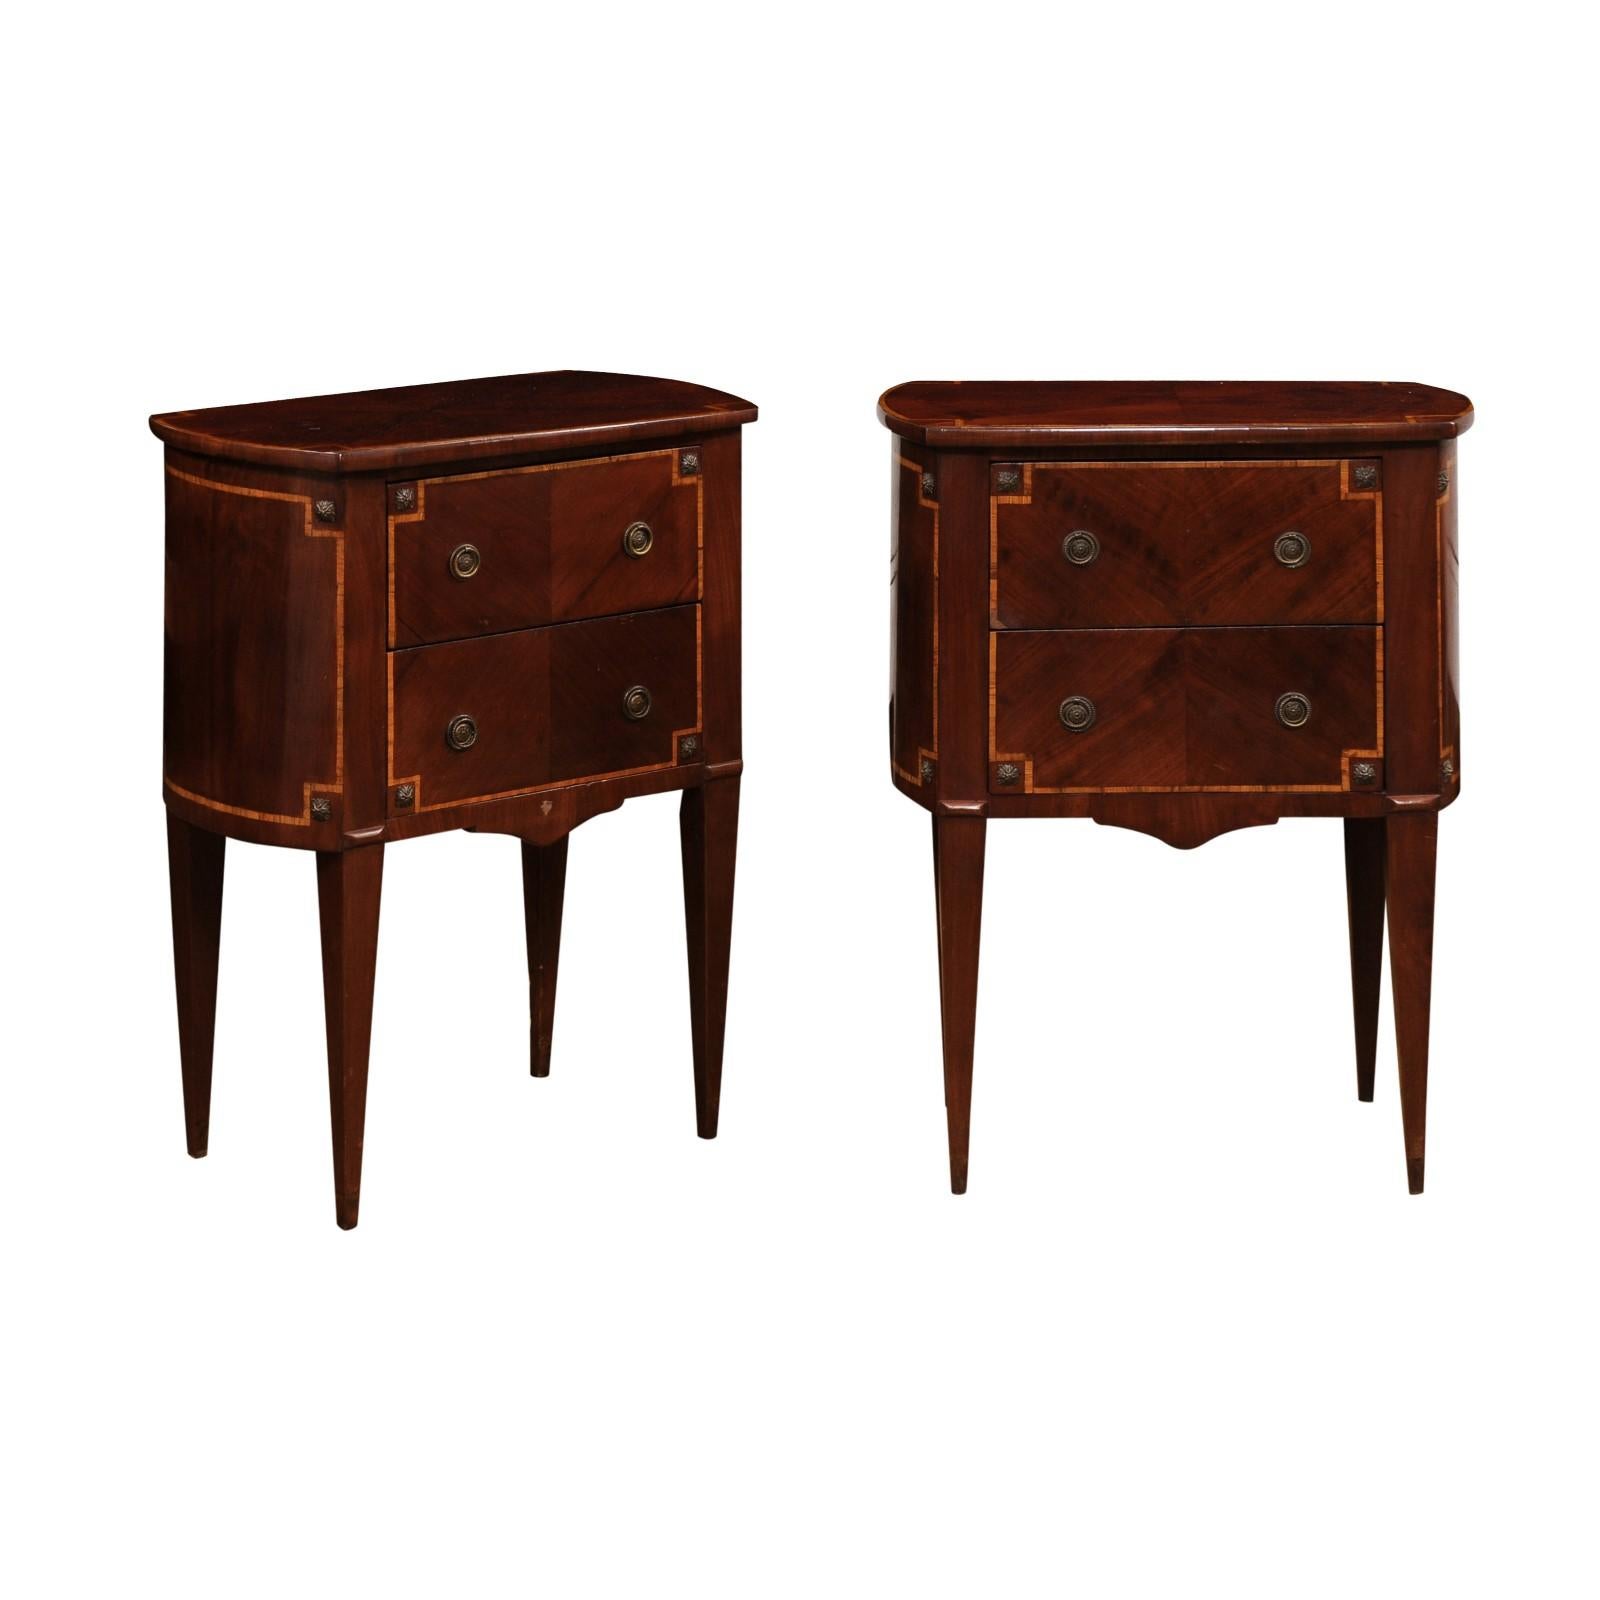 Pair of Italian Neoclassical style mahogany and birch bedside tables from the 19th century with bookmatched veneer. Immerse yourself in the allure of Italian craftsmanship with this 19th century pair of Neoclassical style bedside tables. The tables